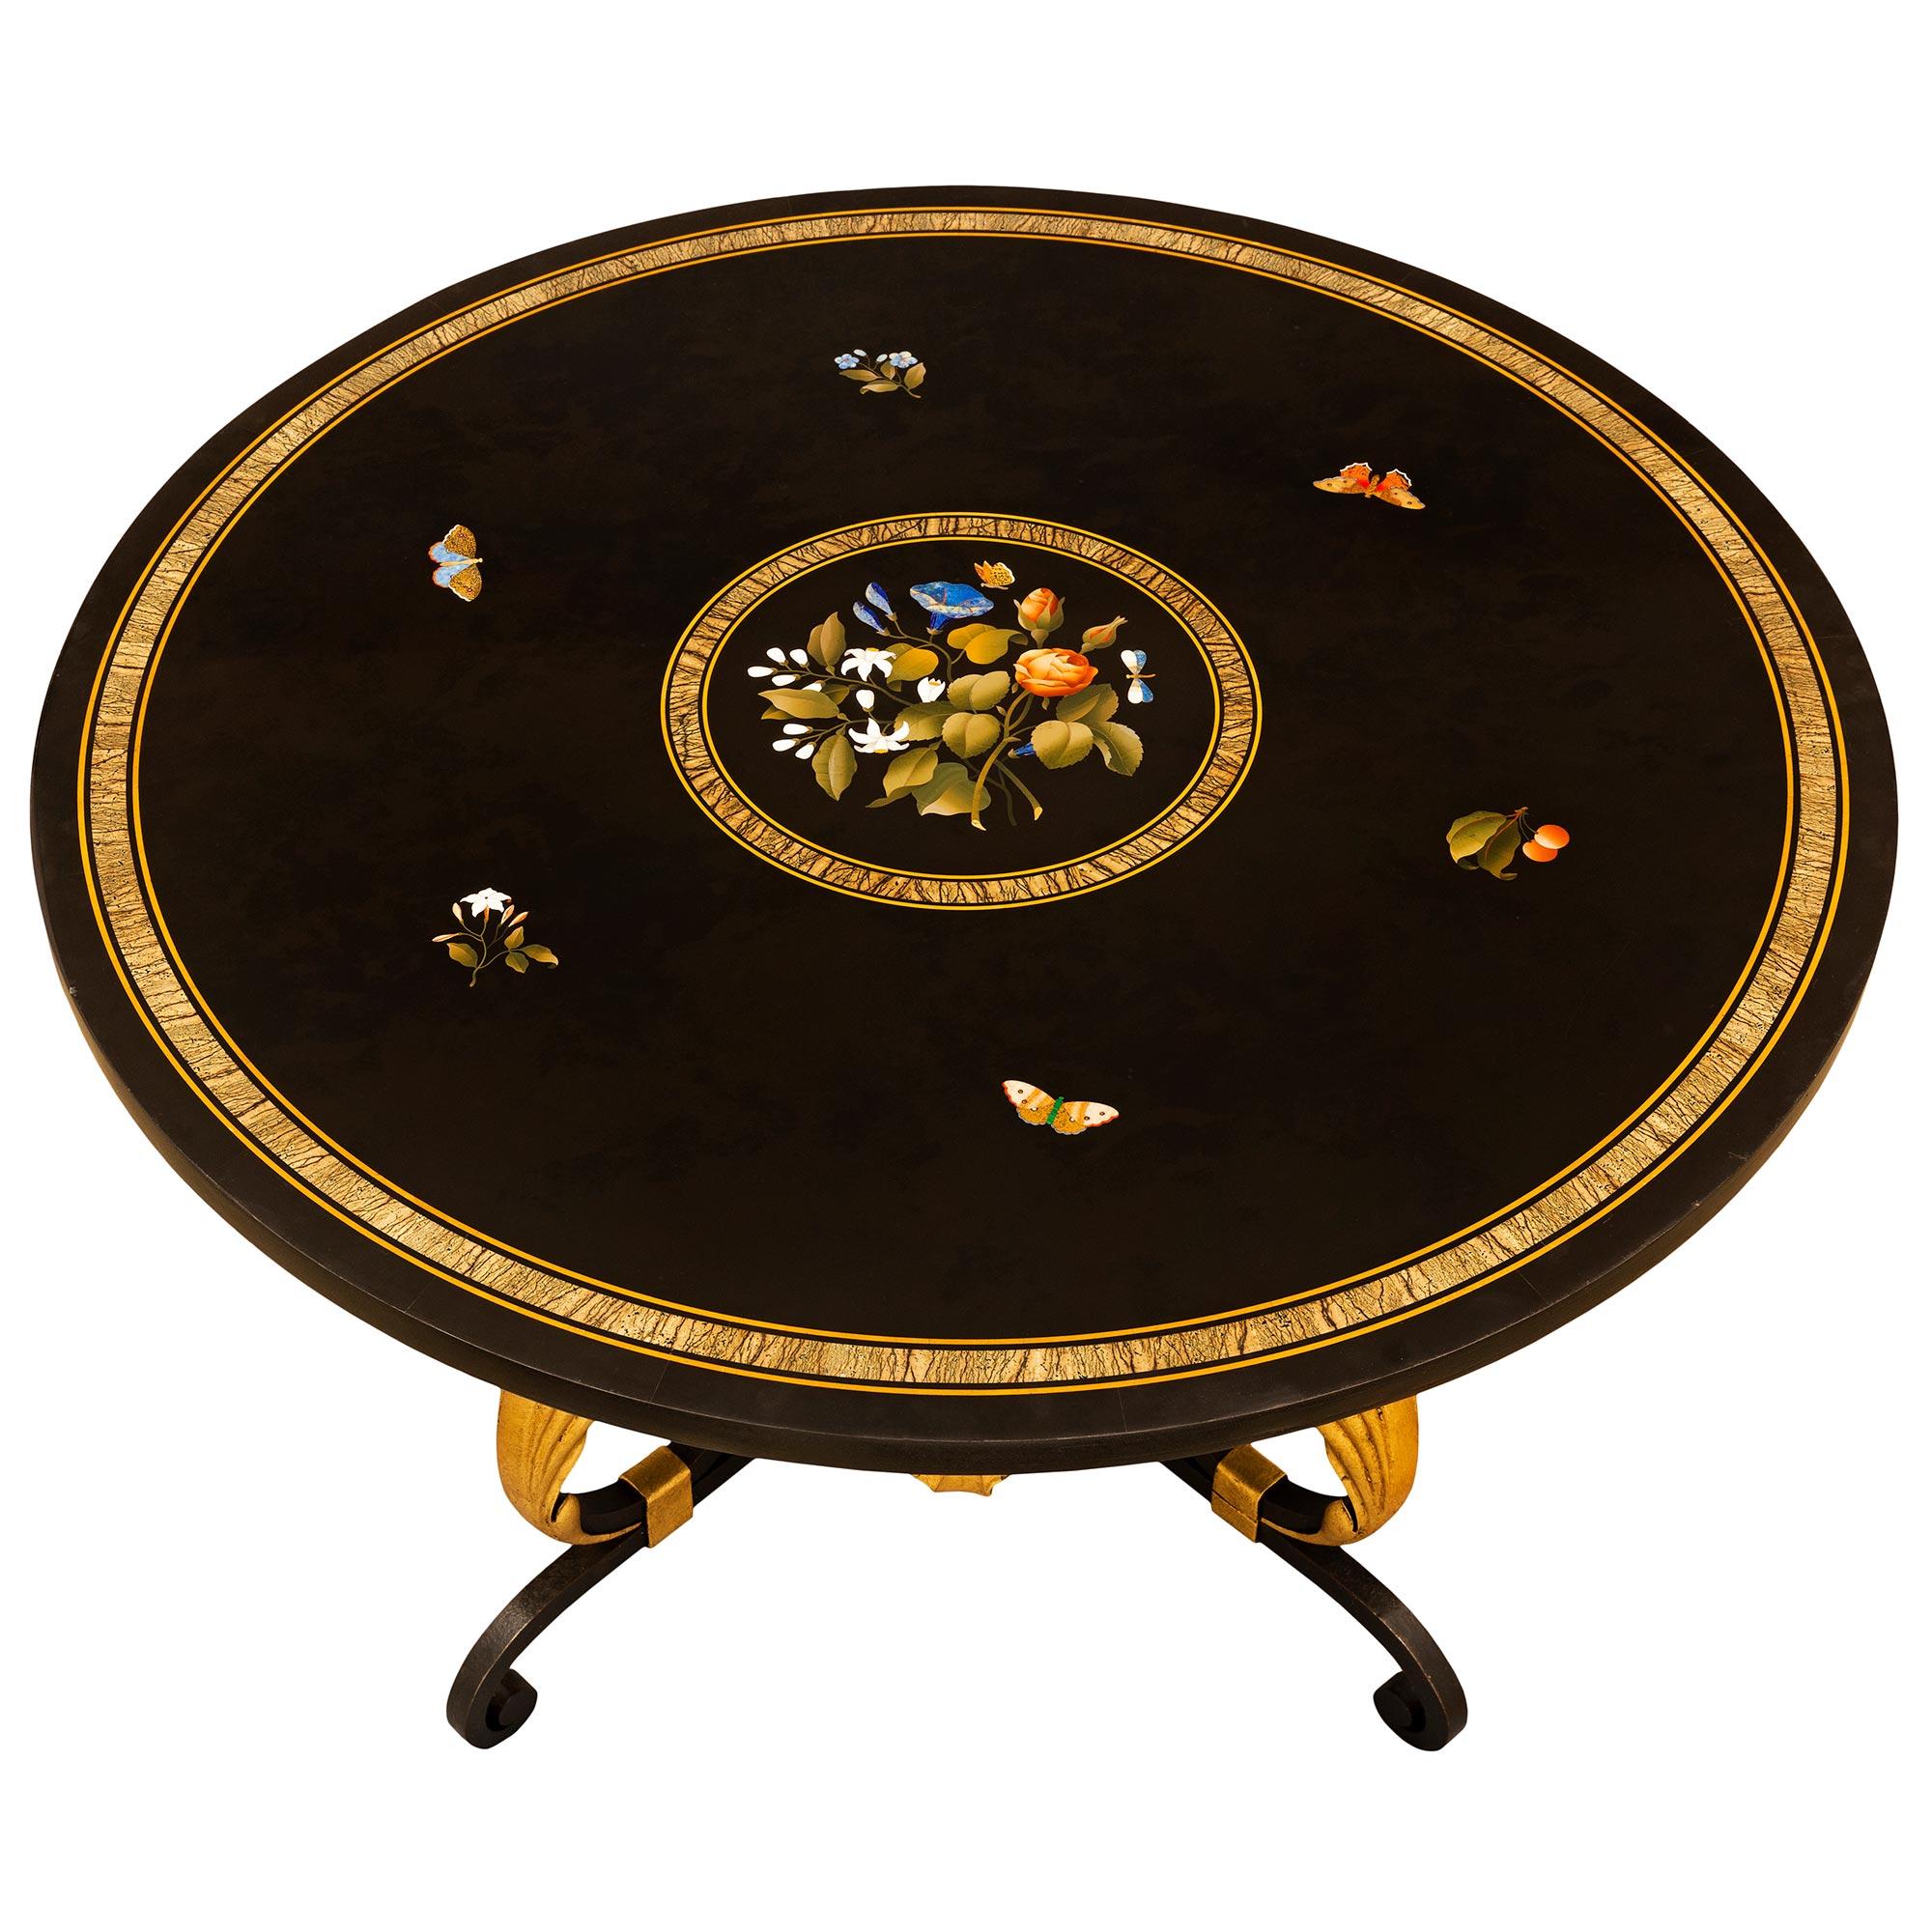 A stunning and extremely decorative Italian 19th century Florentine st. wrought iron, gilt metal and Pietra Dura marble cocktail table. The circular table is raised by a striking wrought iron base with beautiful scrolled designs and exceptional